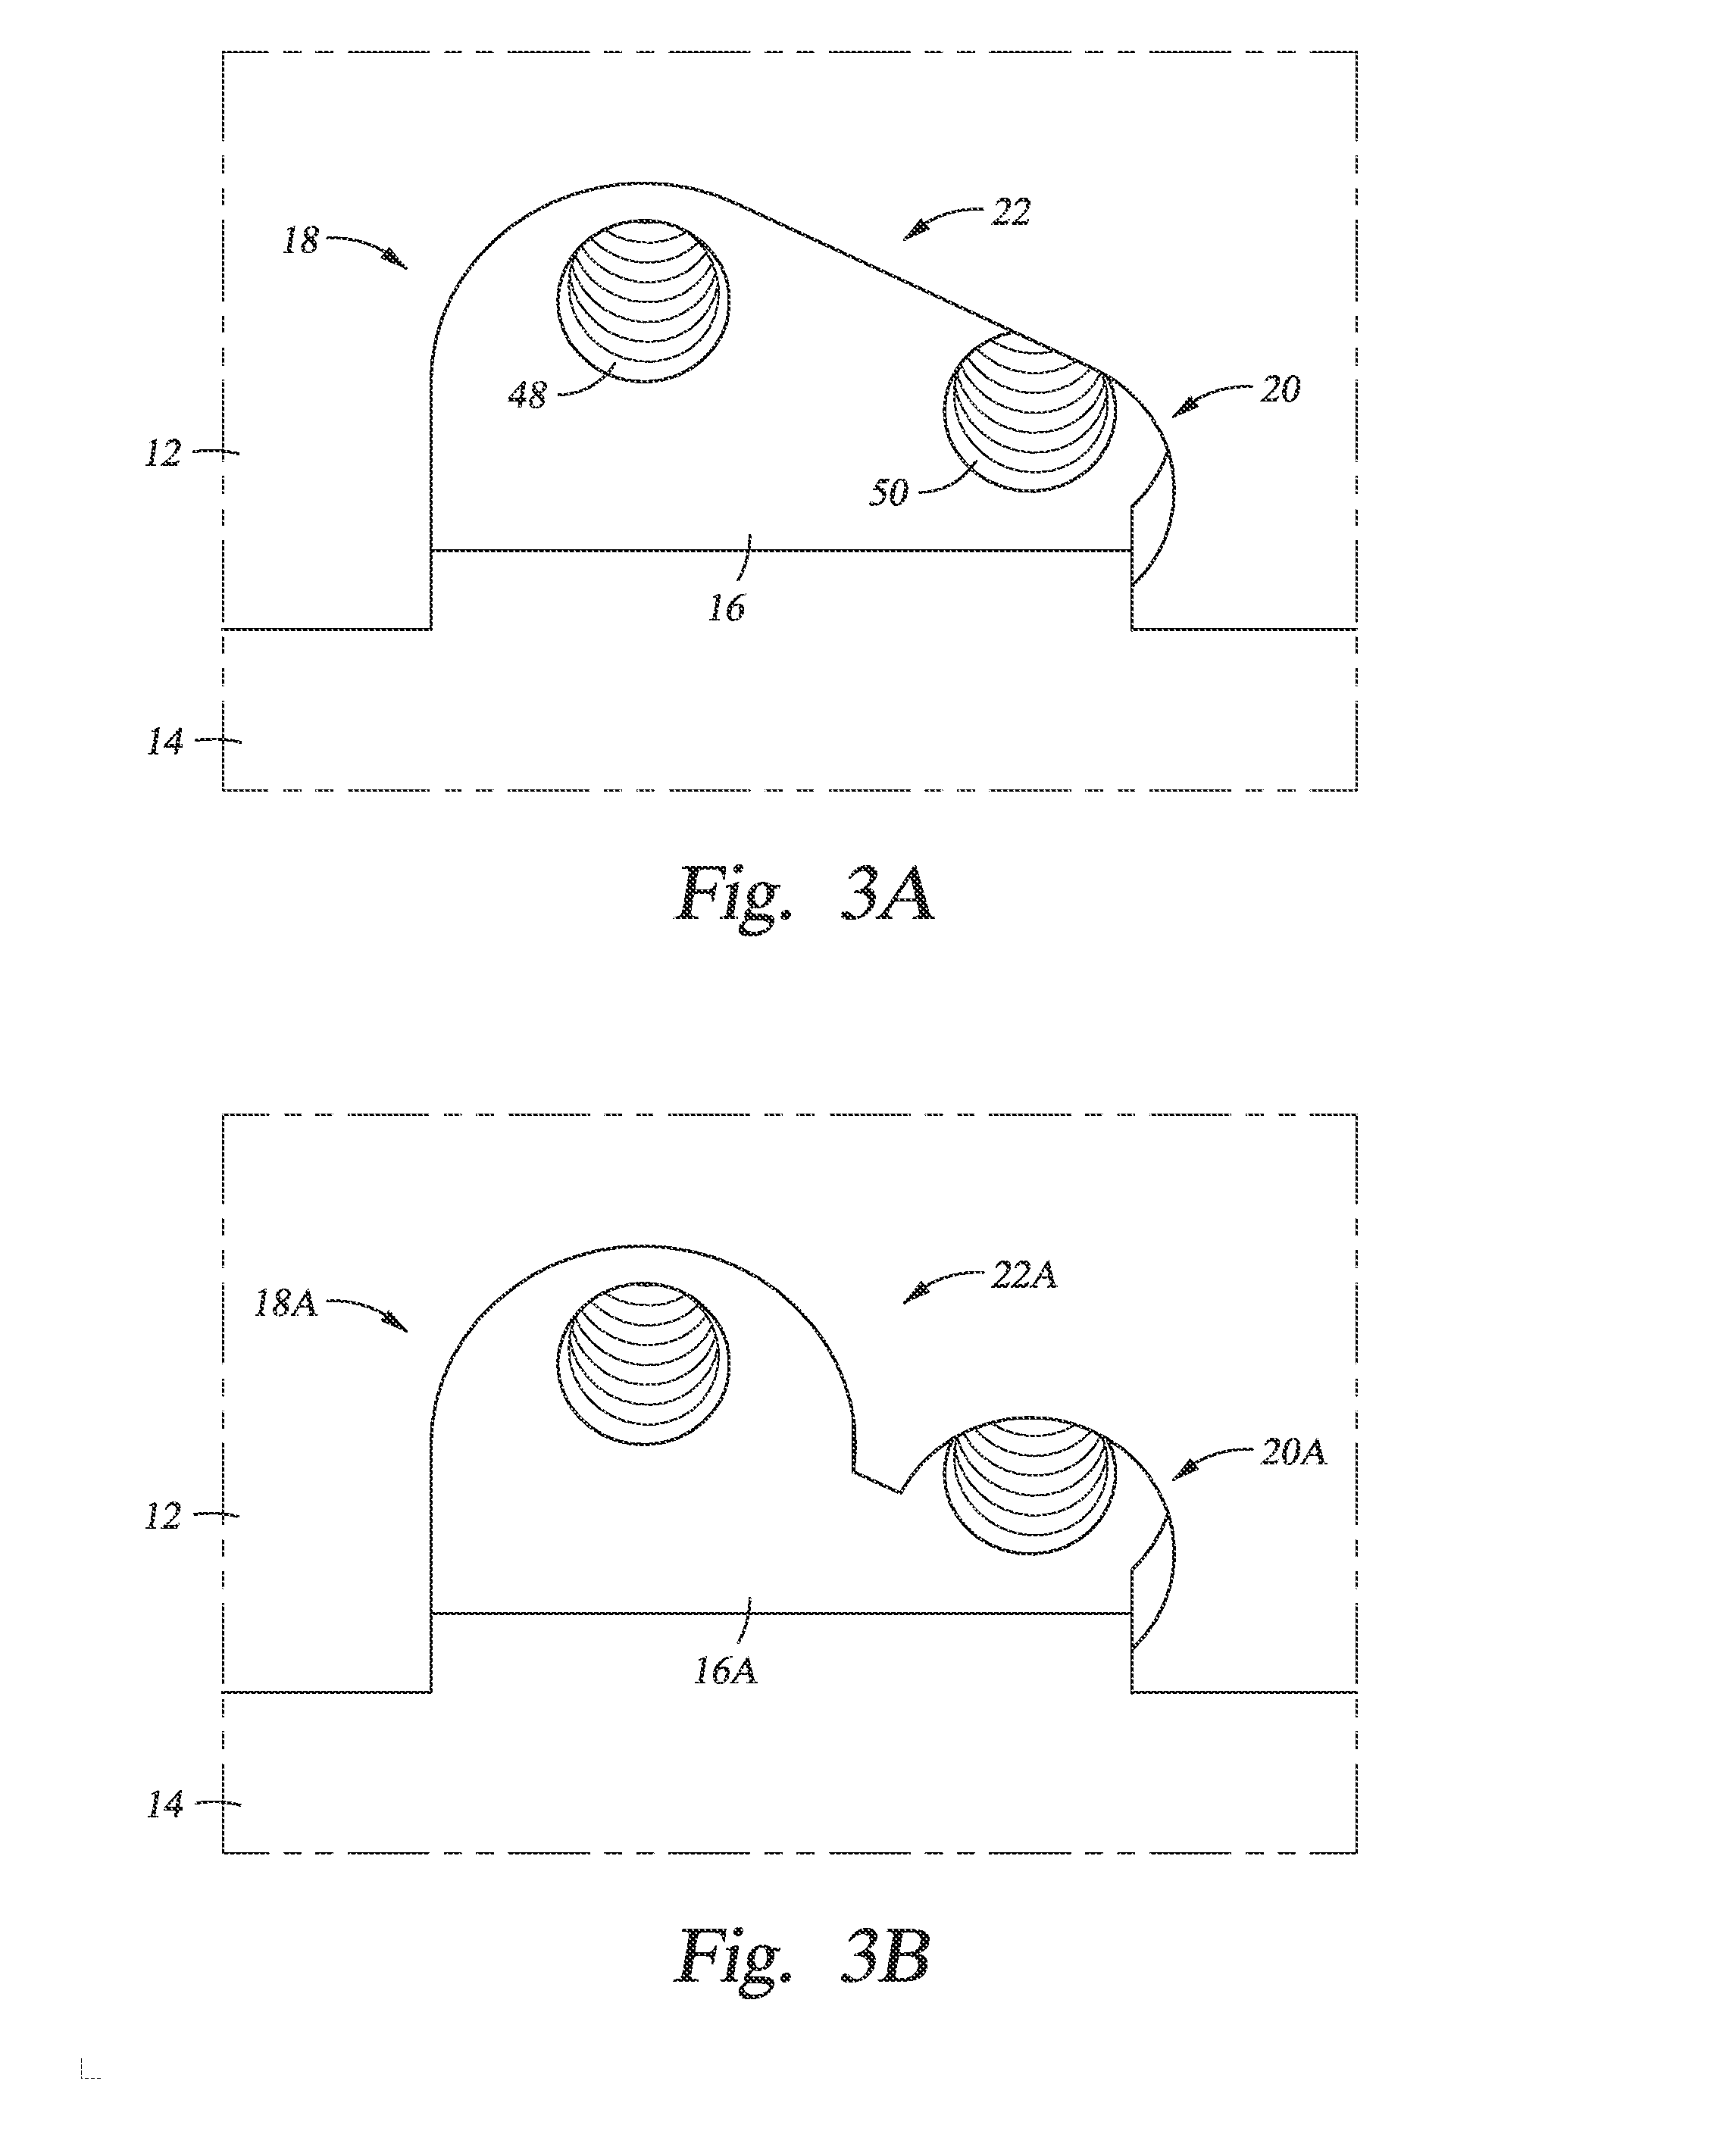 Anti-rotation system for box and pin connection